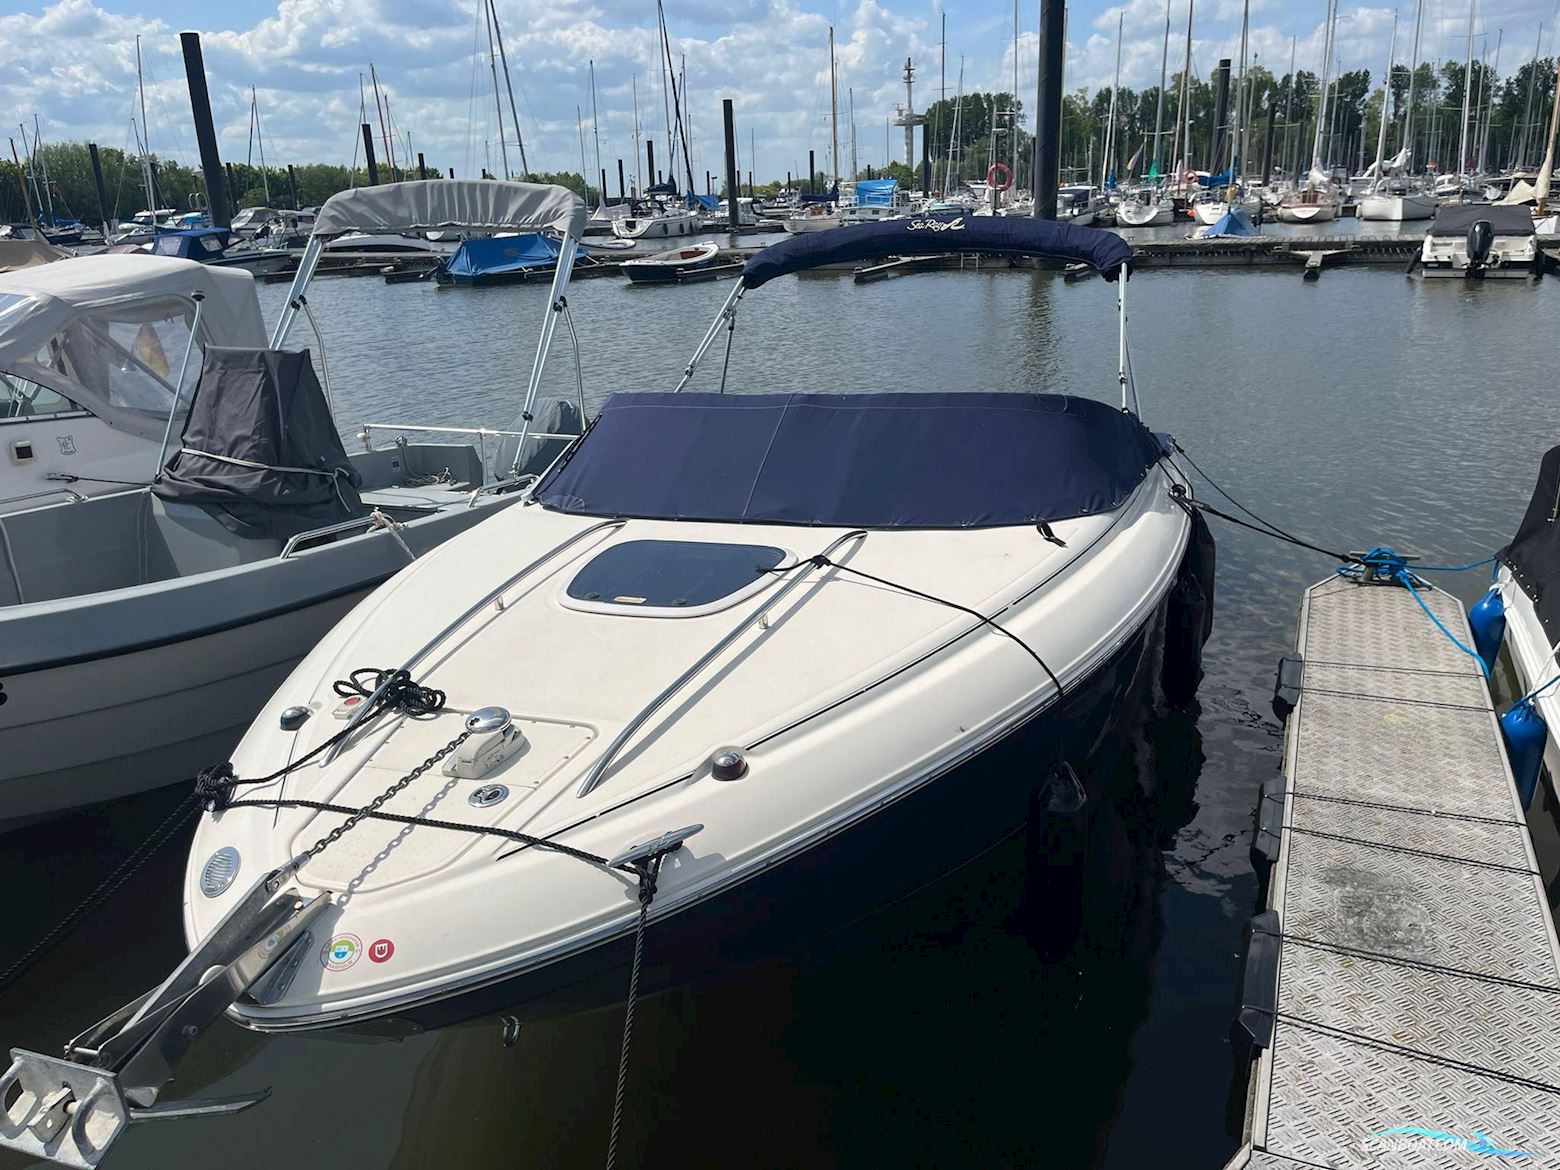 Sea Ray 220 Overnighter Motor boat 2007, with Mercruiser engine, Germany